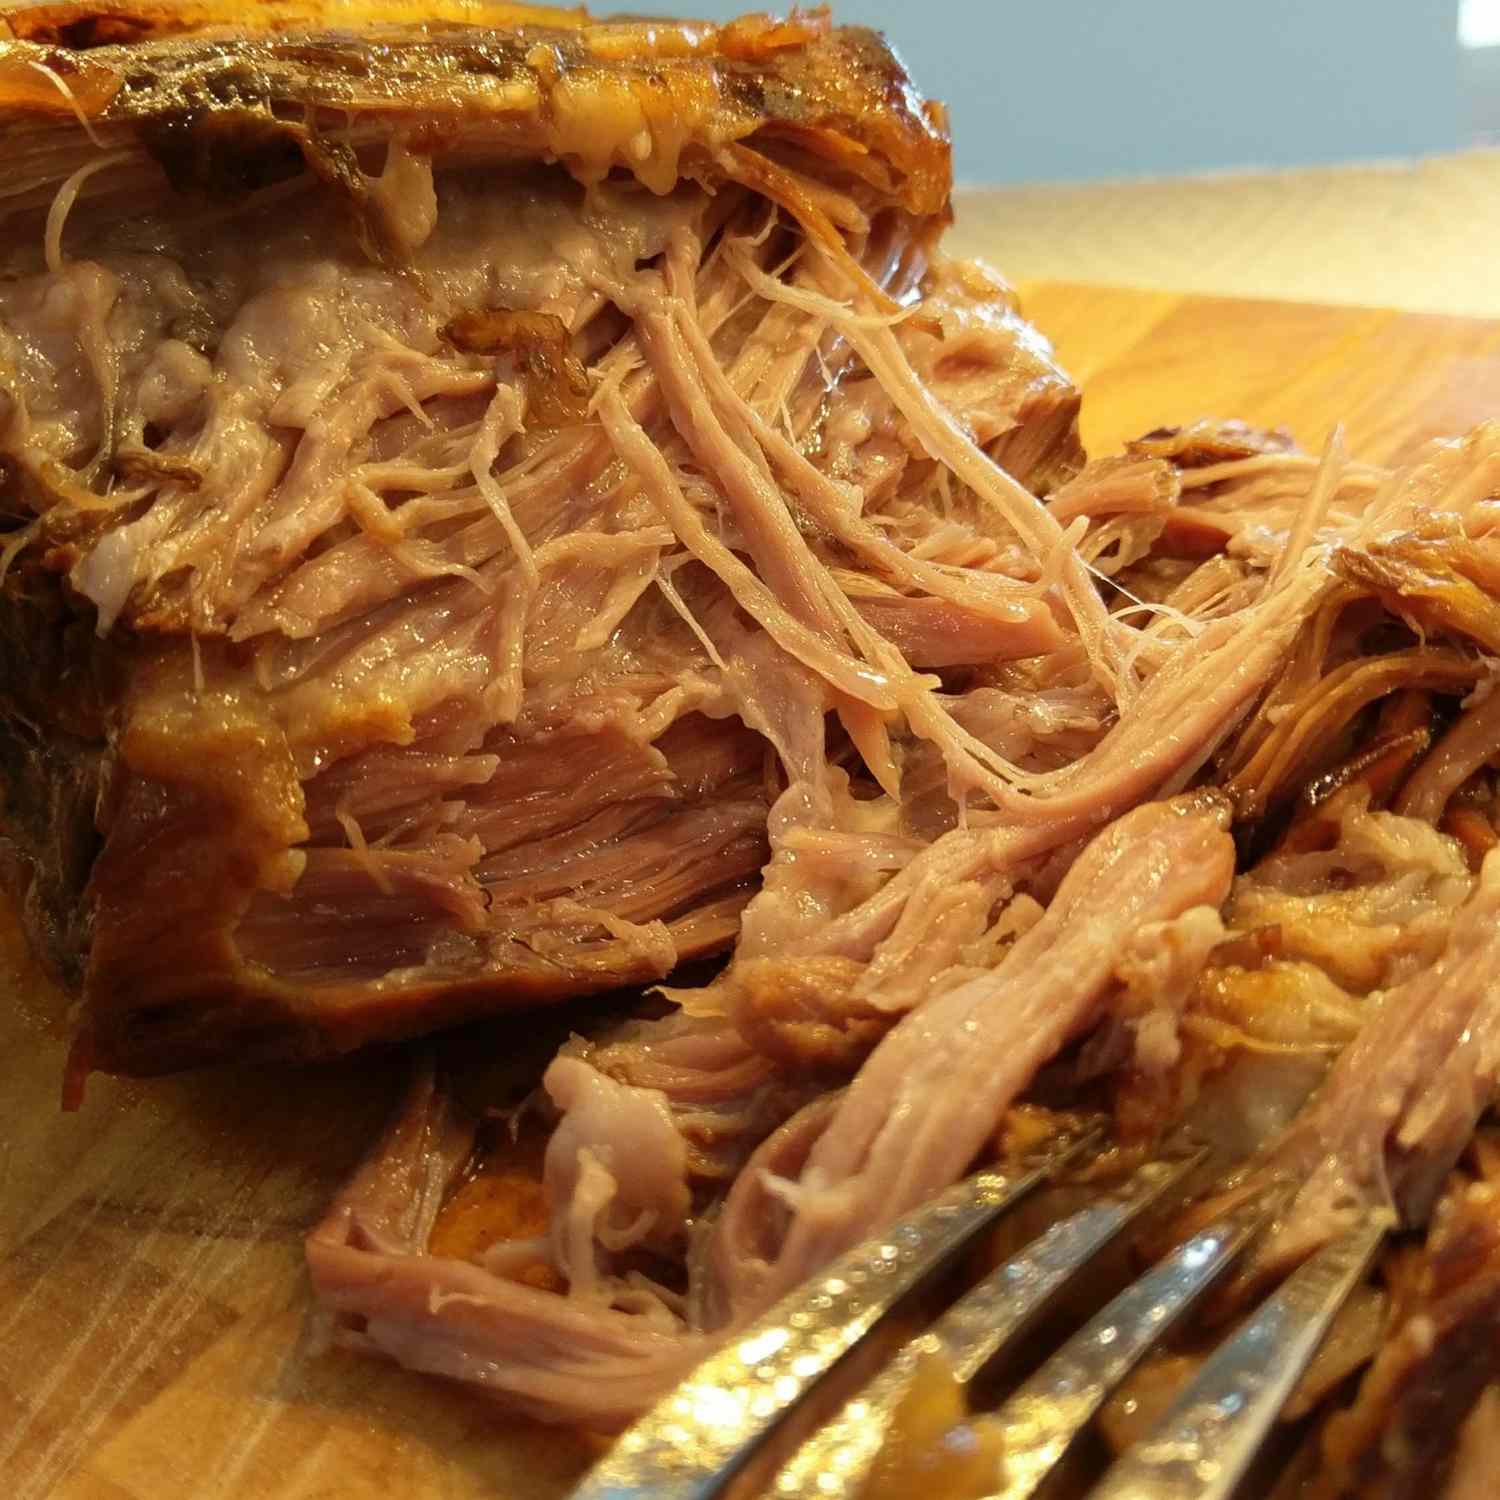 Southern Yank Pulled Pork BBQ on a wooden cutting board